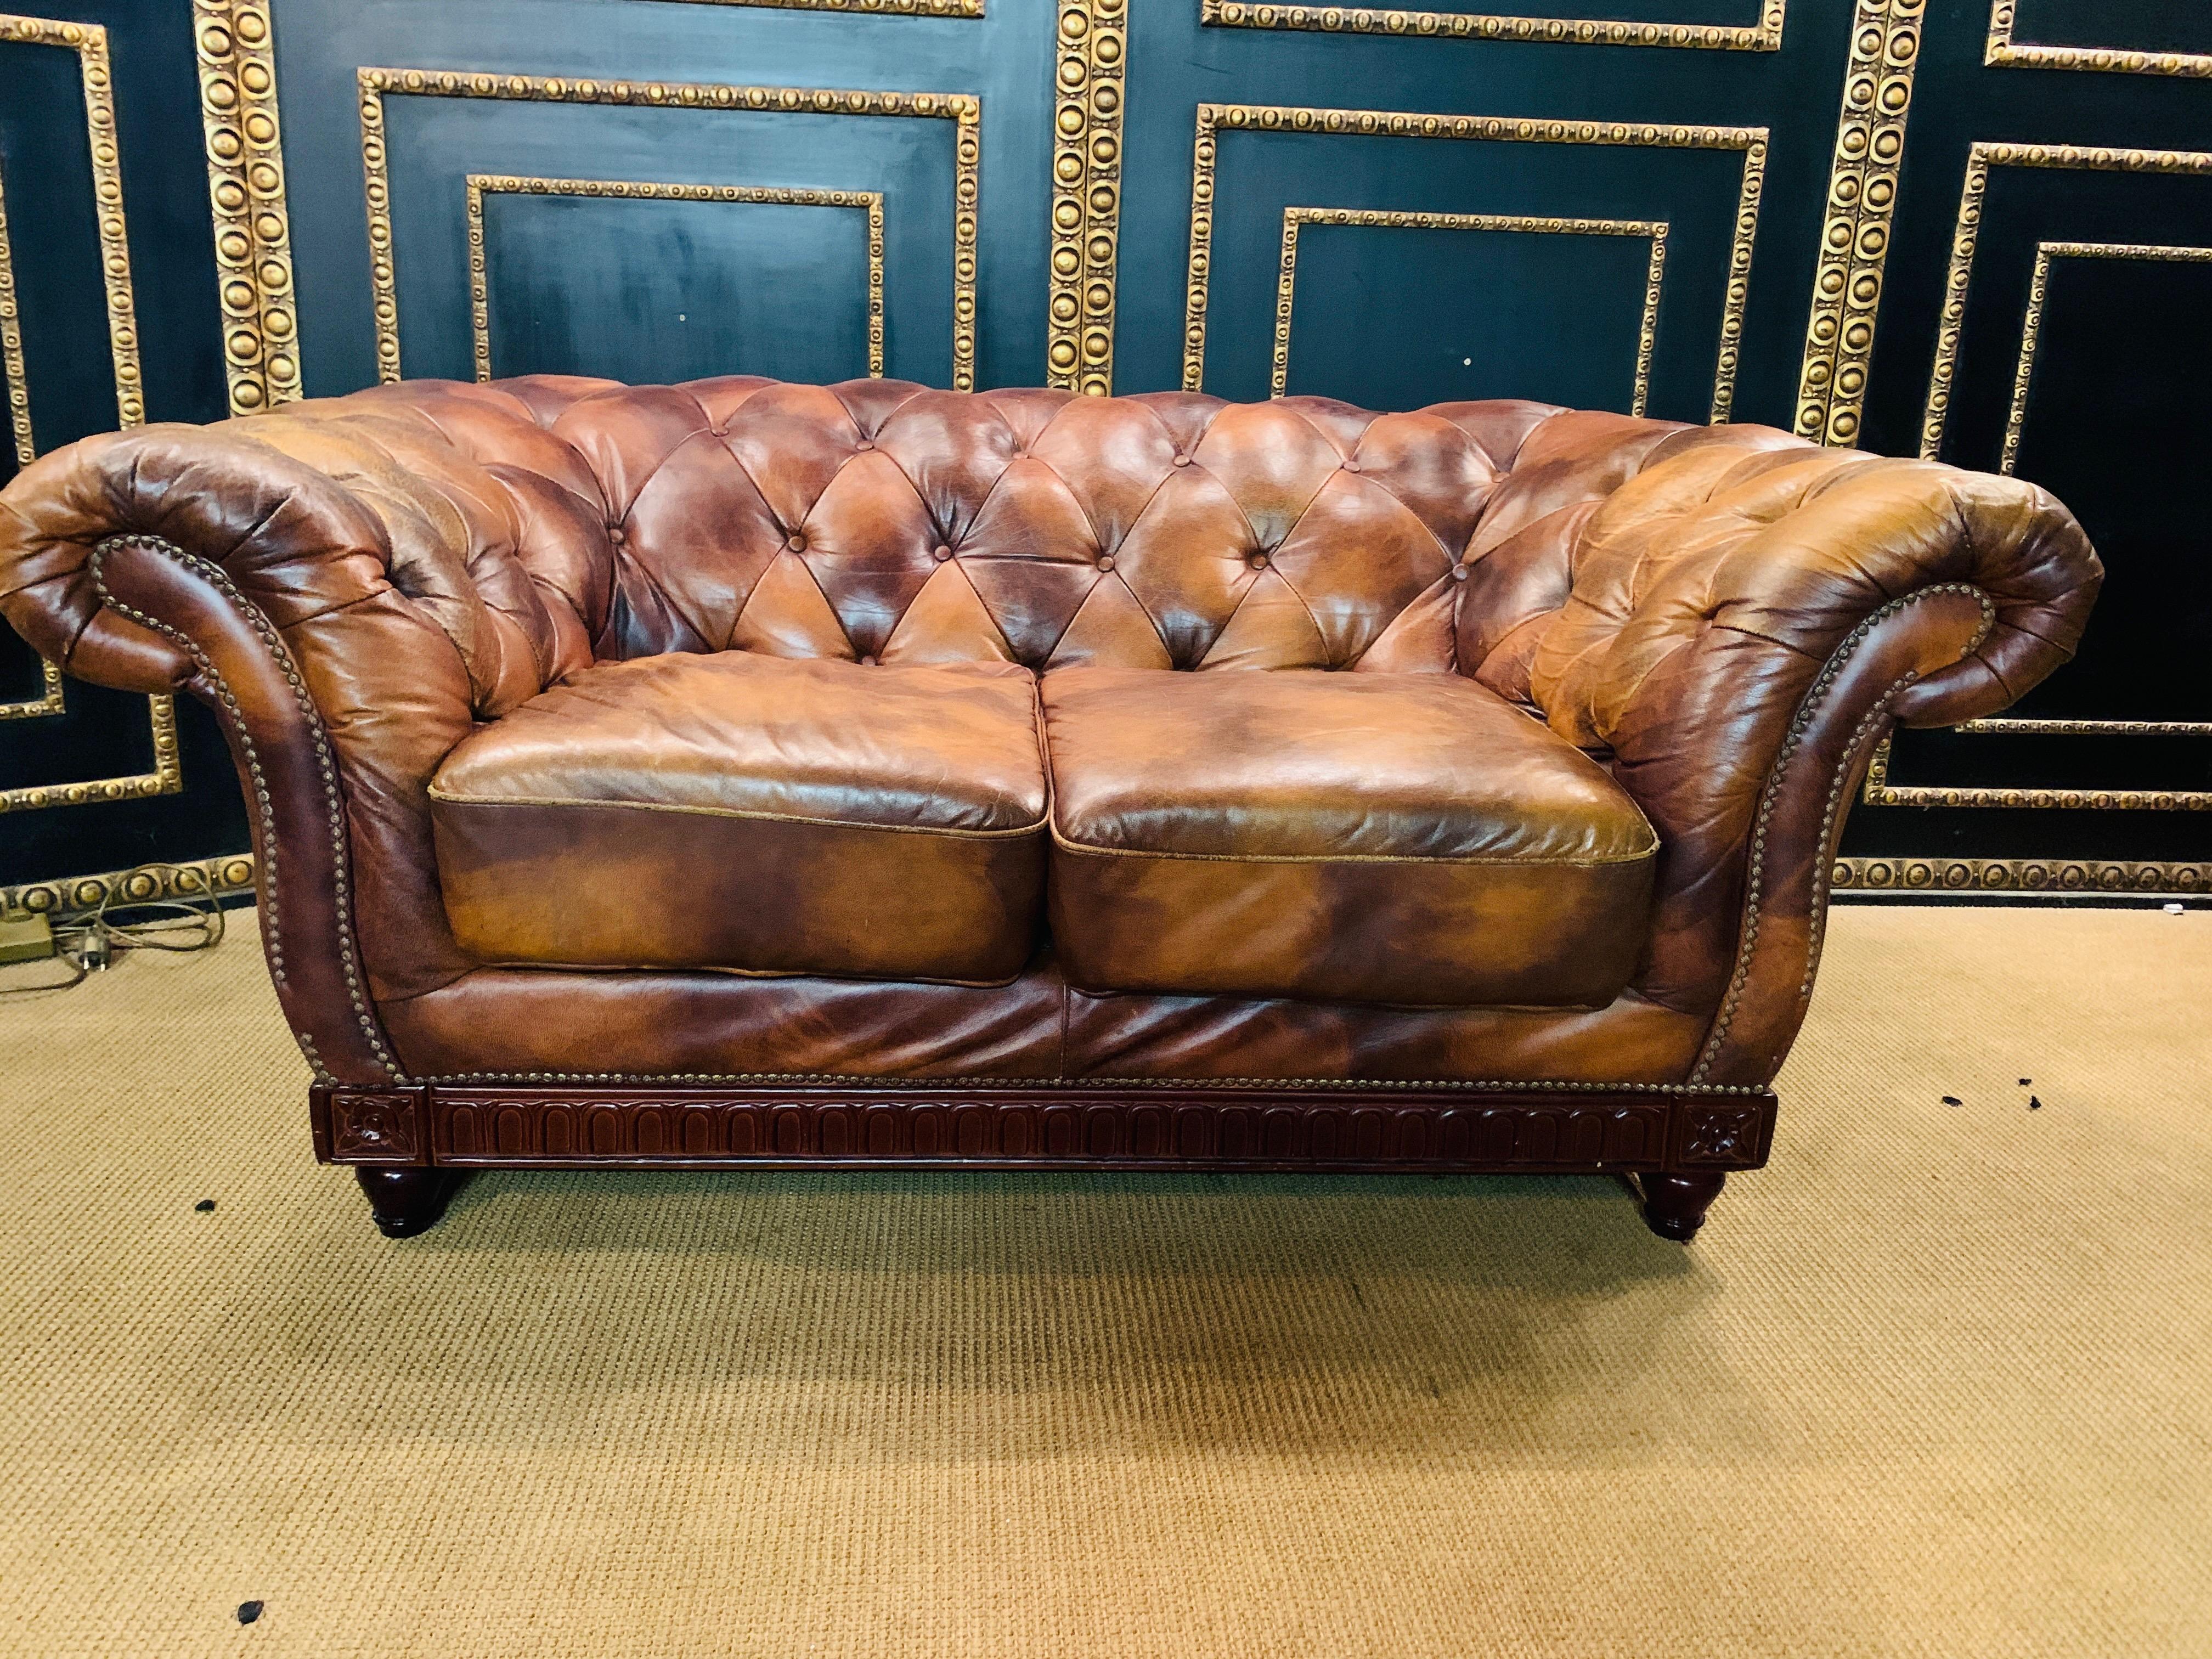 We are delight to be able to offer you this extraordinary and unique Chesterfield 2-seater sofa.
The rare cow-like leather pattern is an eye-catcher and cannot be found again in this way. Solid wood strips with an oval shape and patterns on each